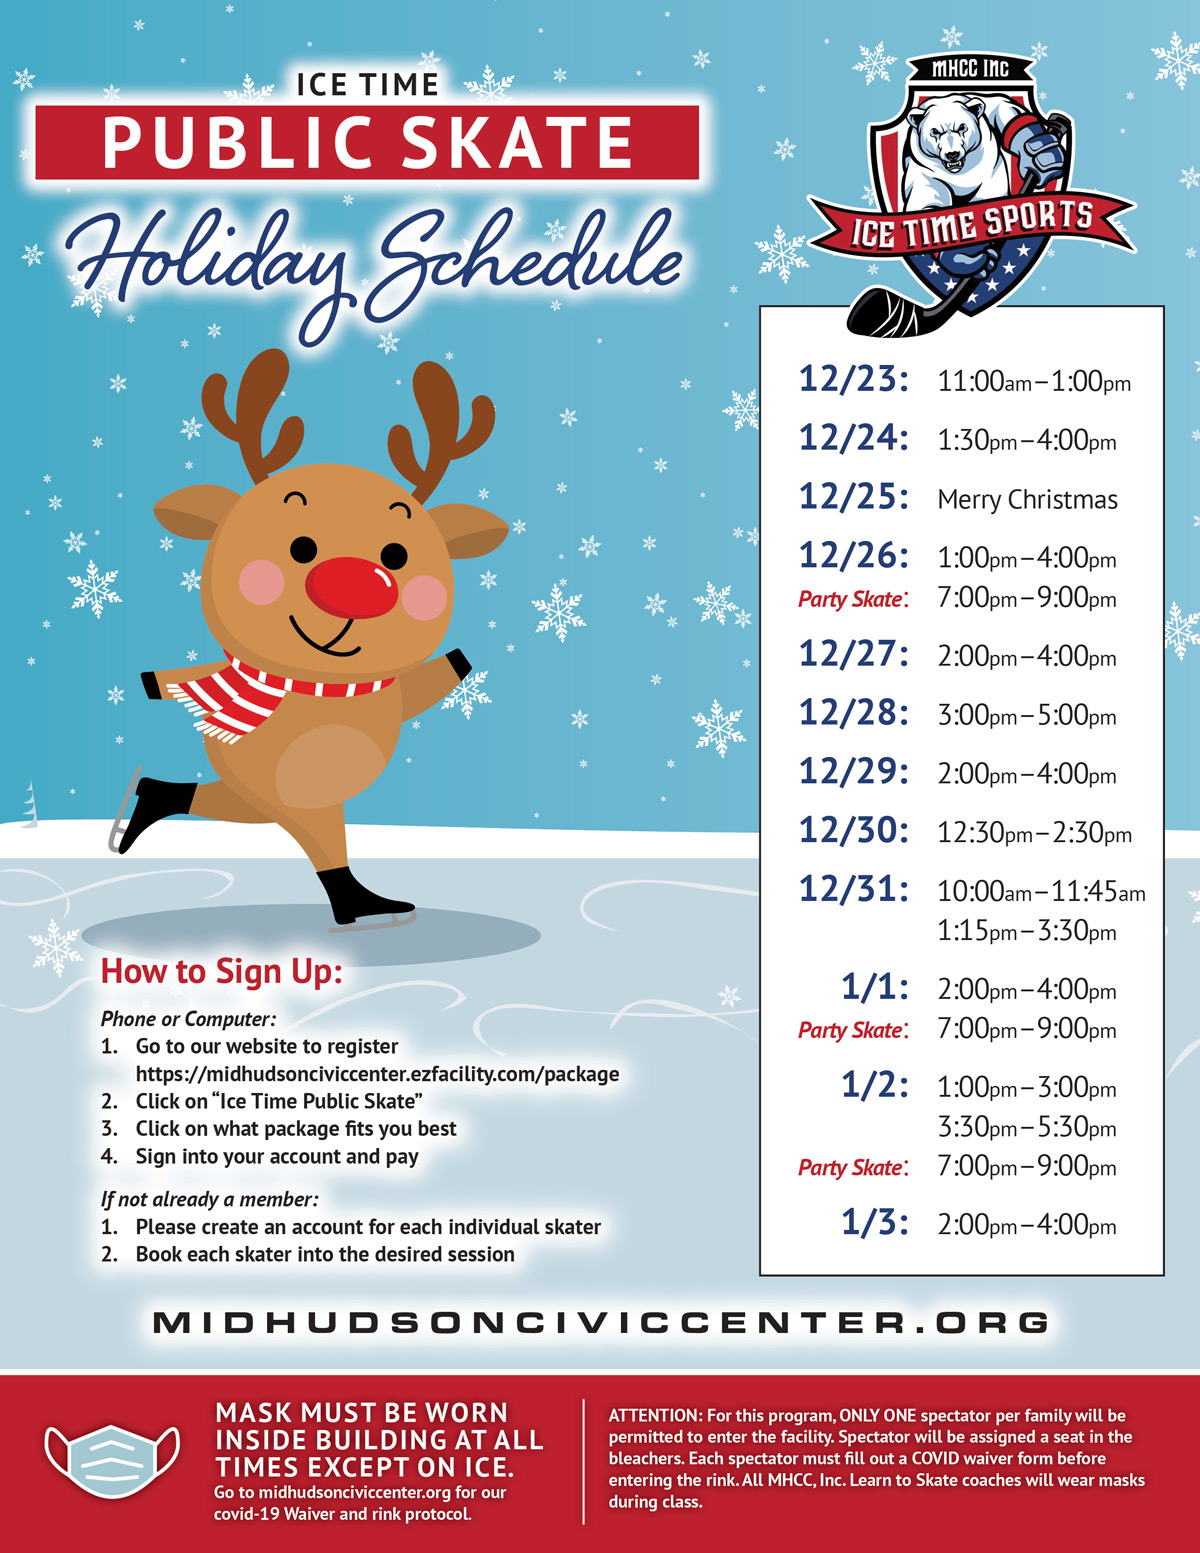 Ice Time Public Skate Holiday Schedule